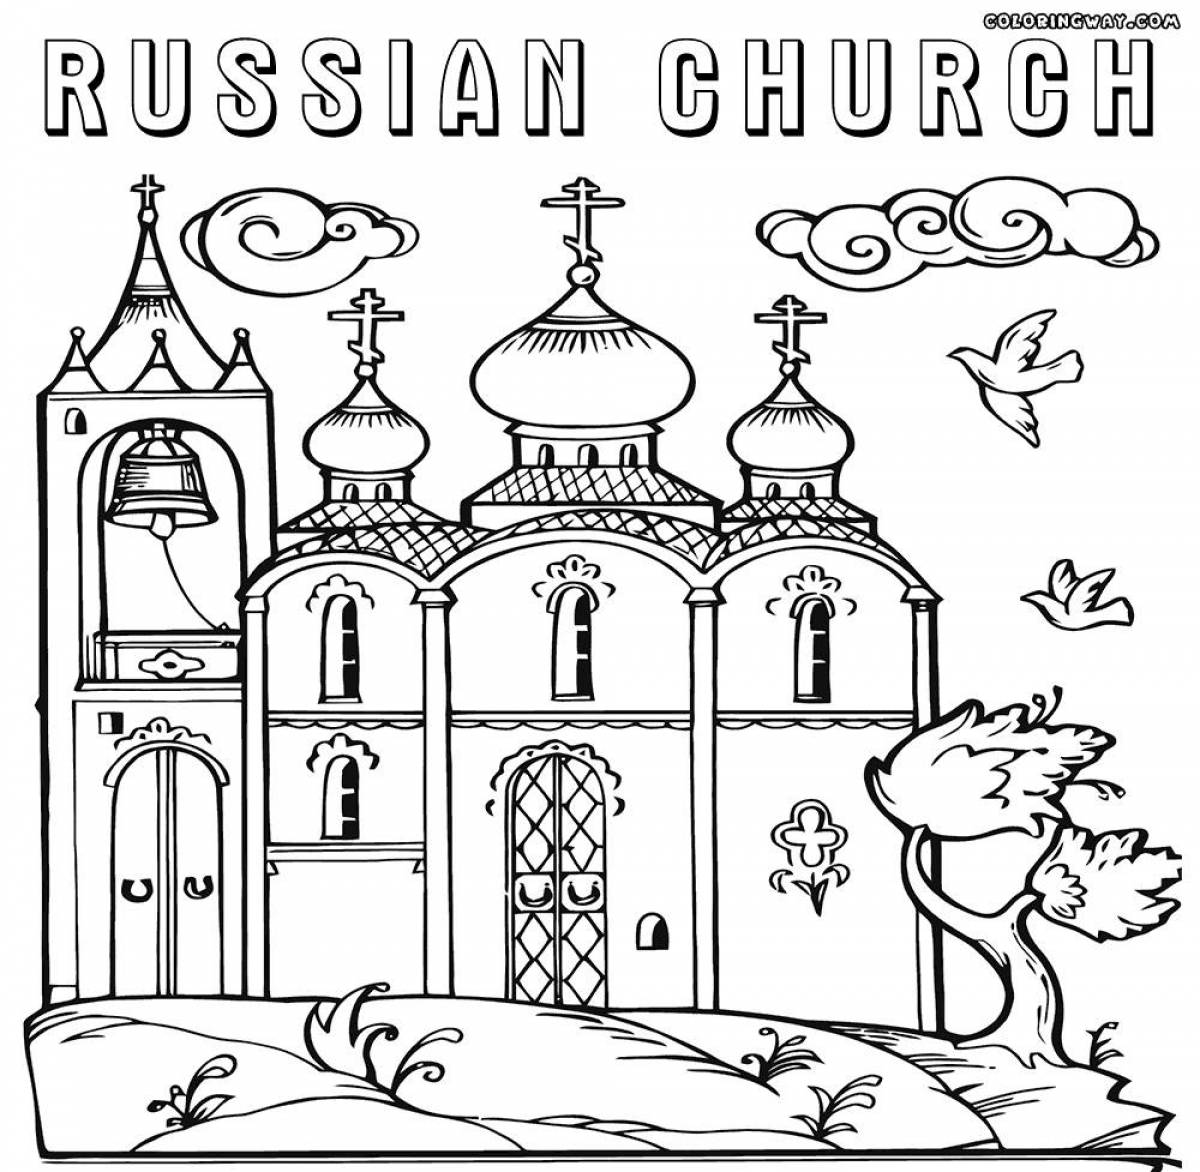 Coloring page elevated church